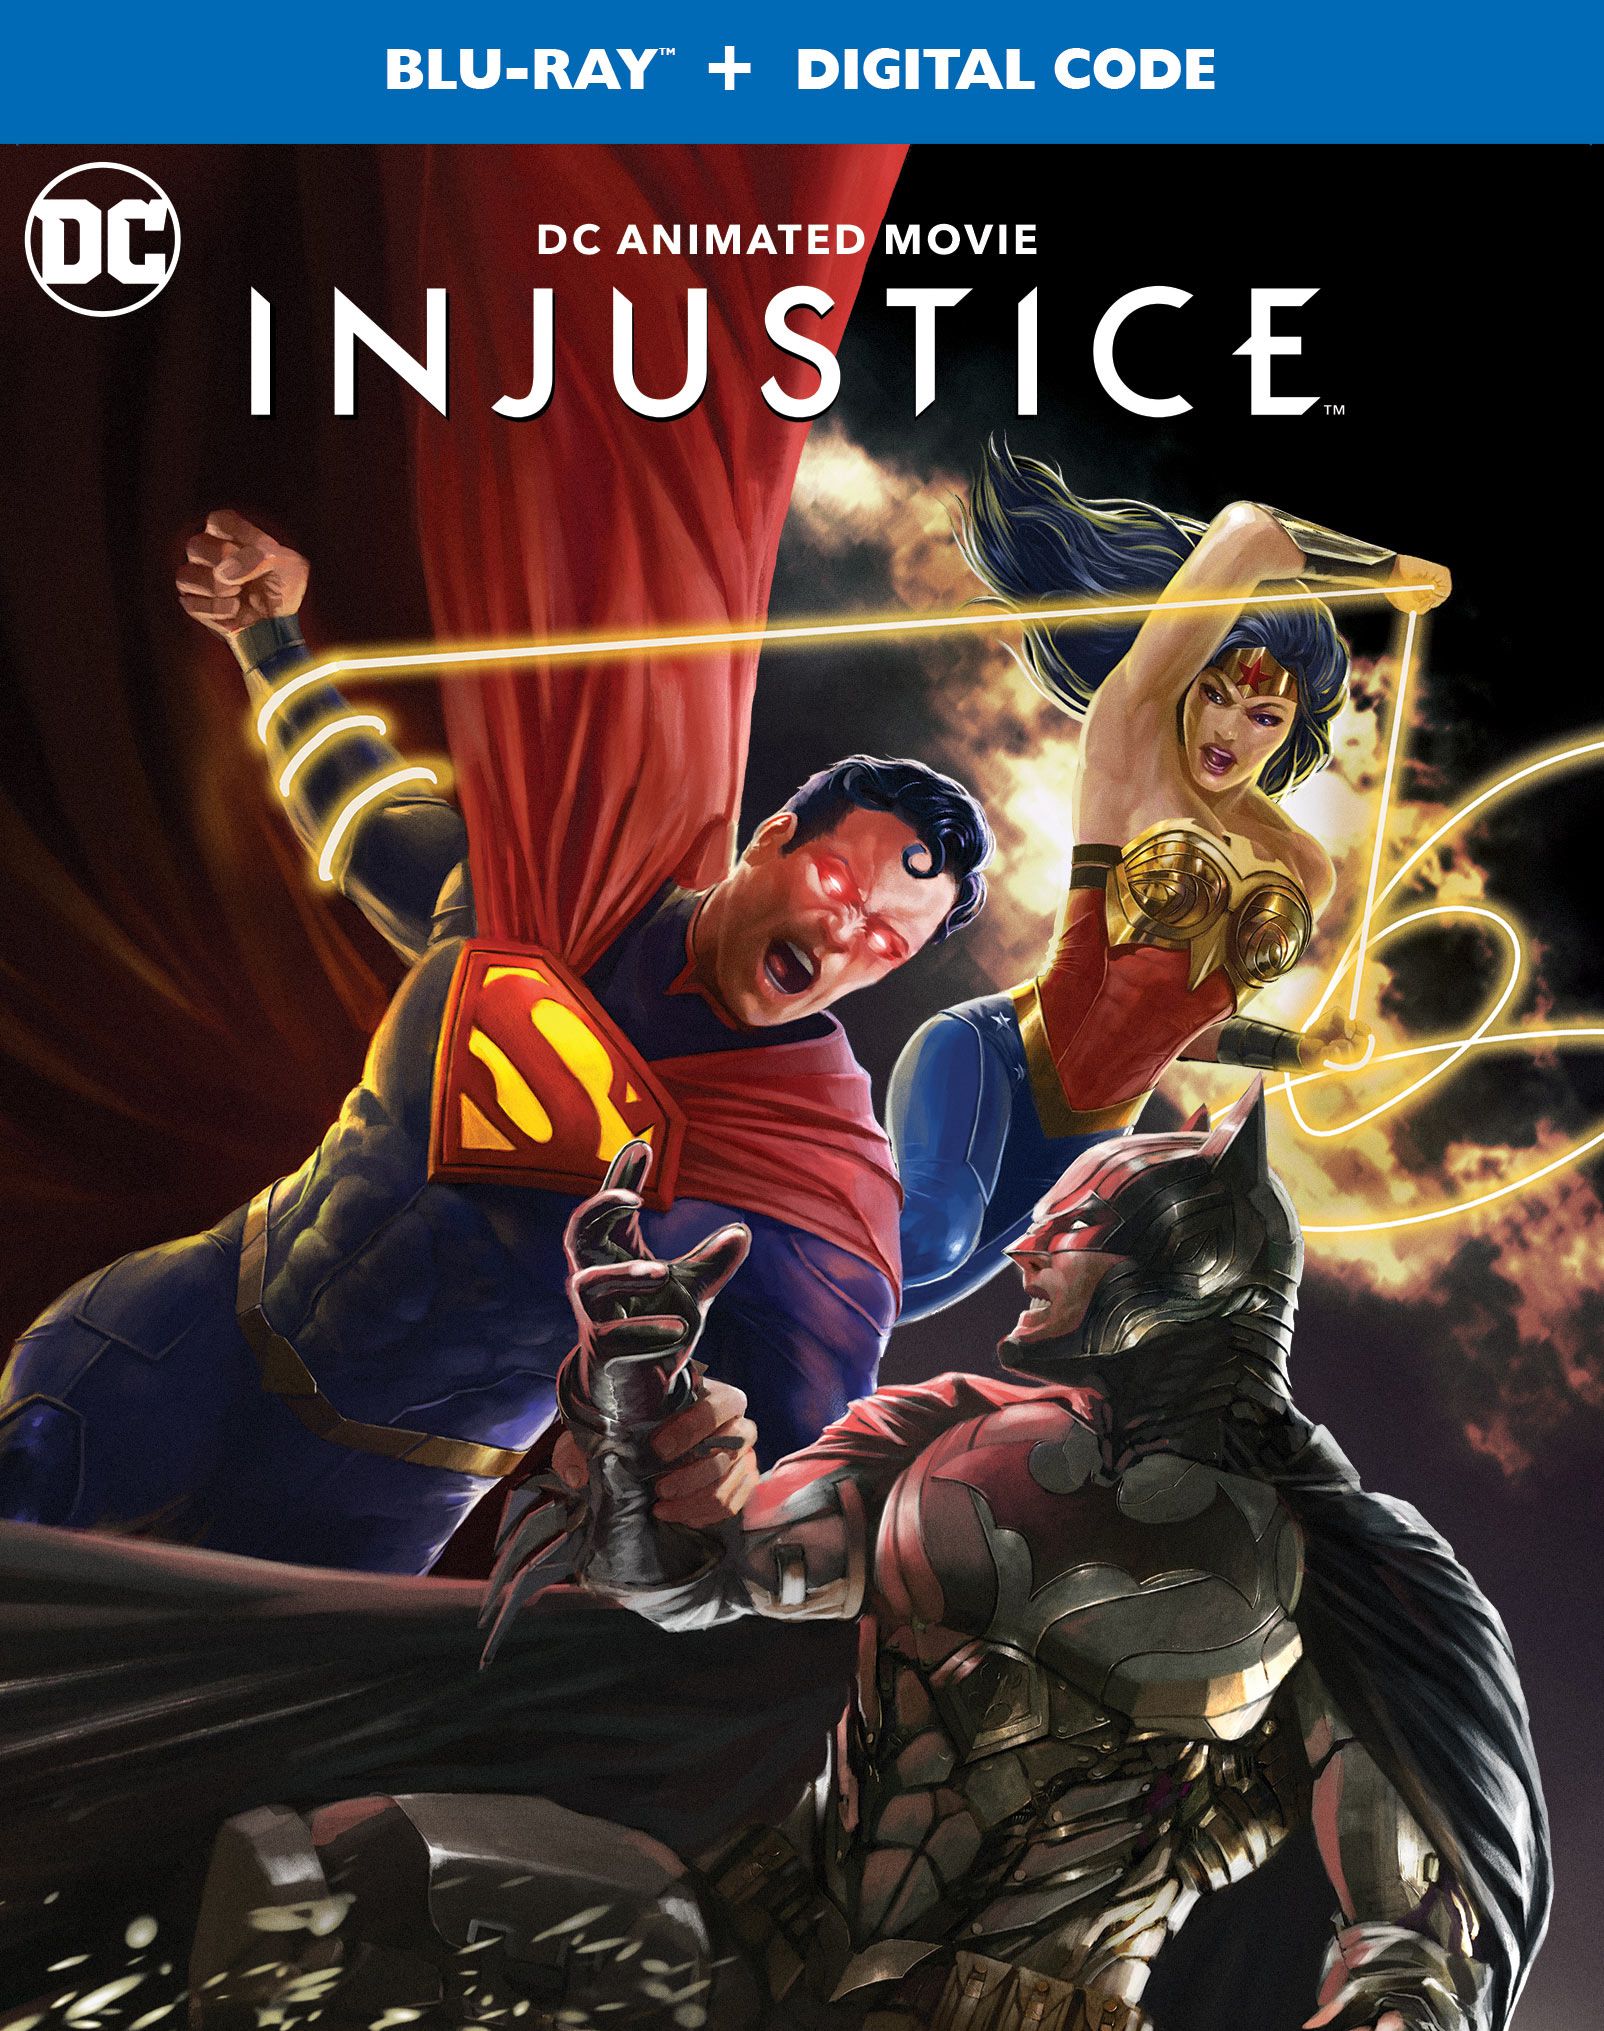 Injustice Blu-Ray cover